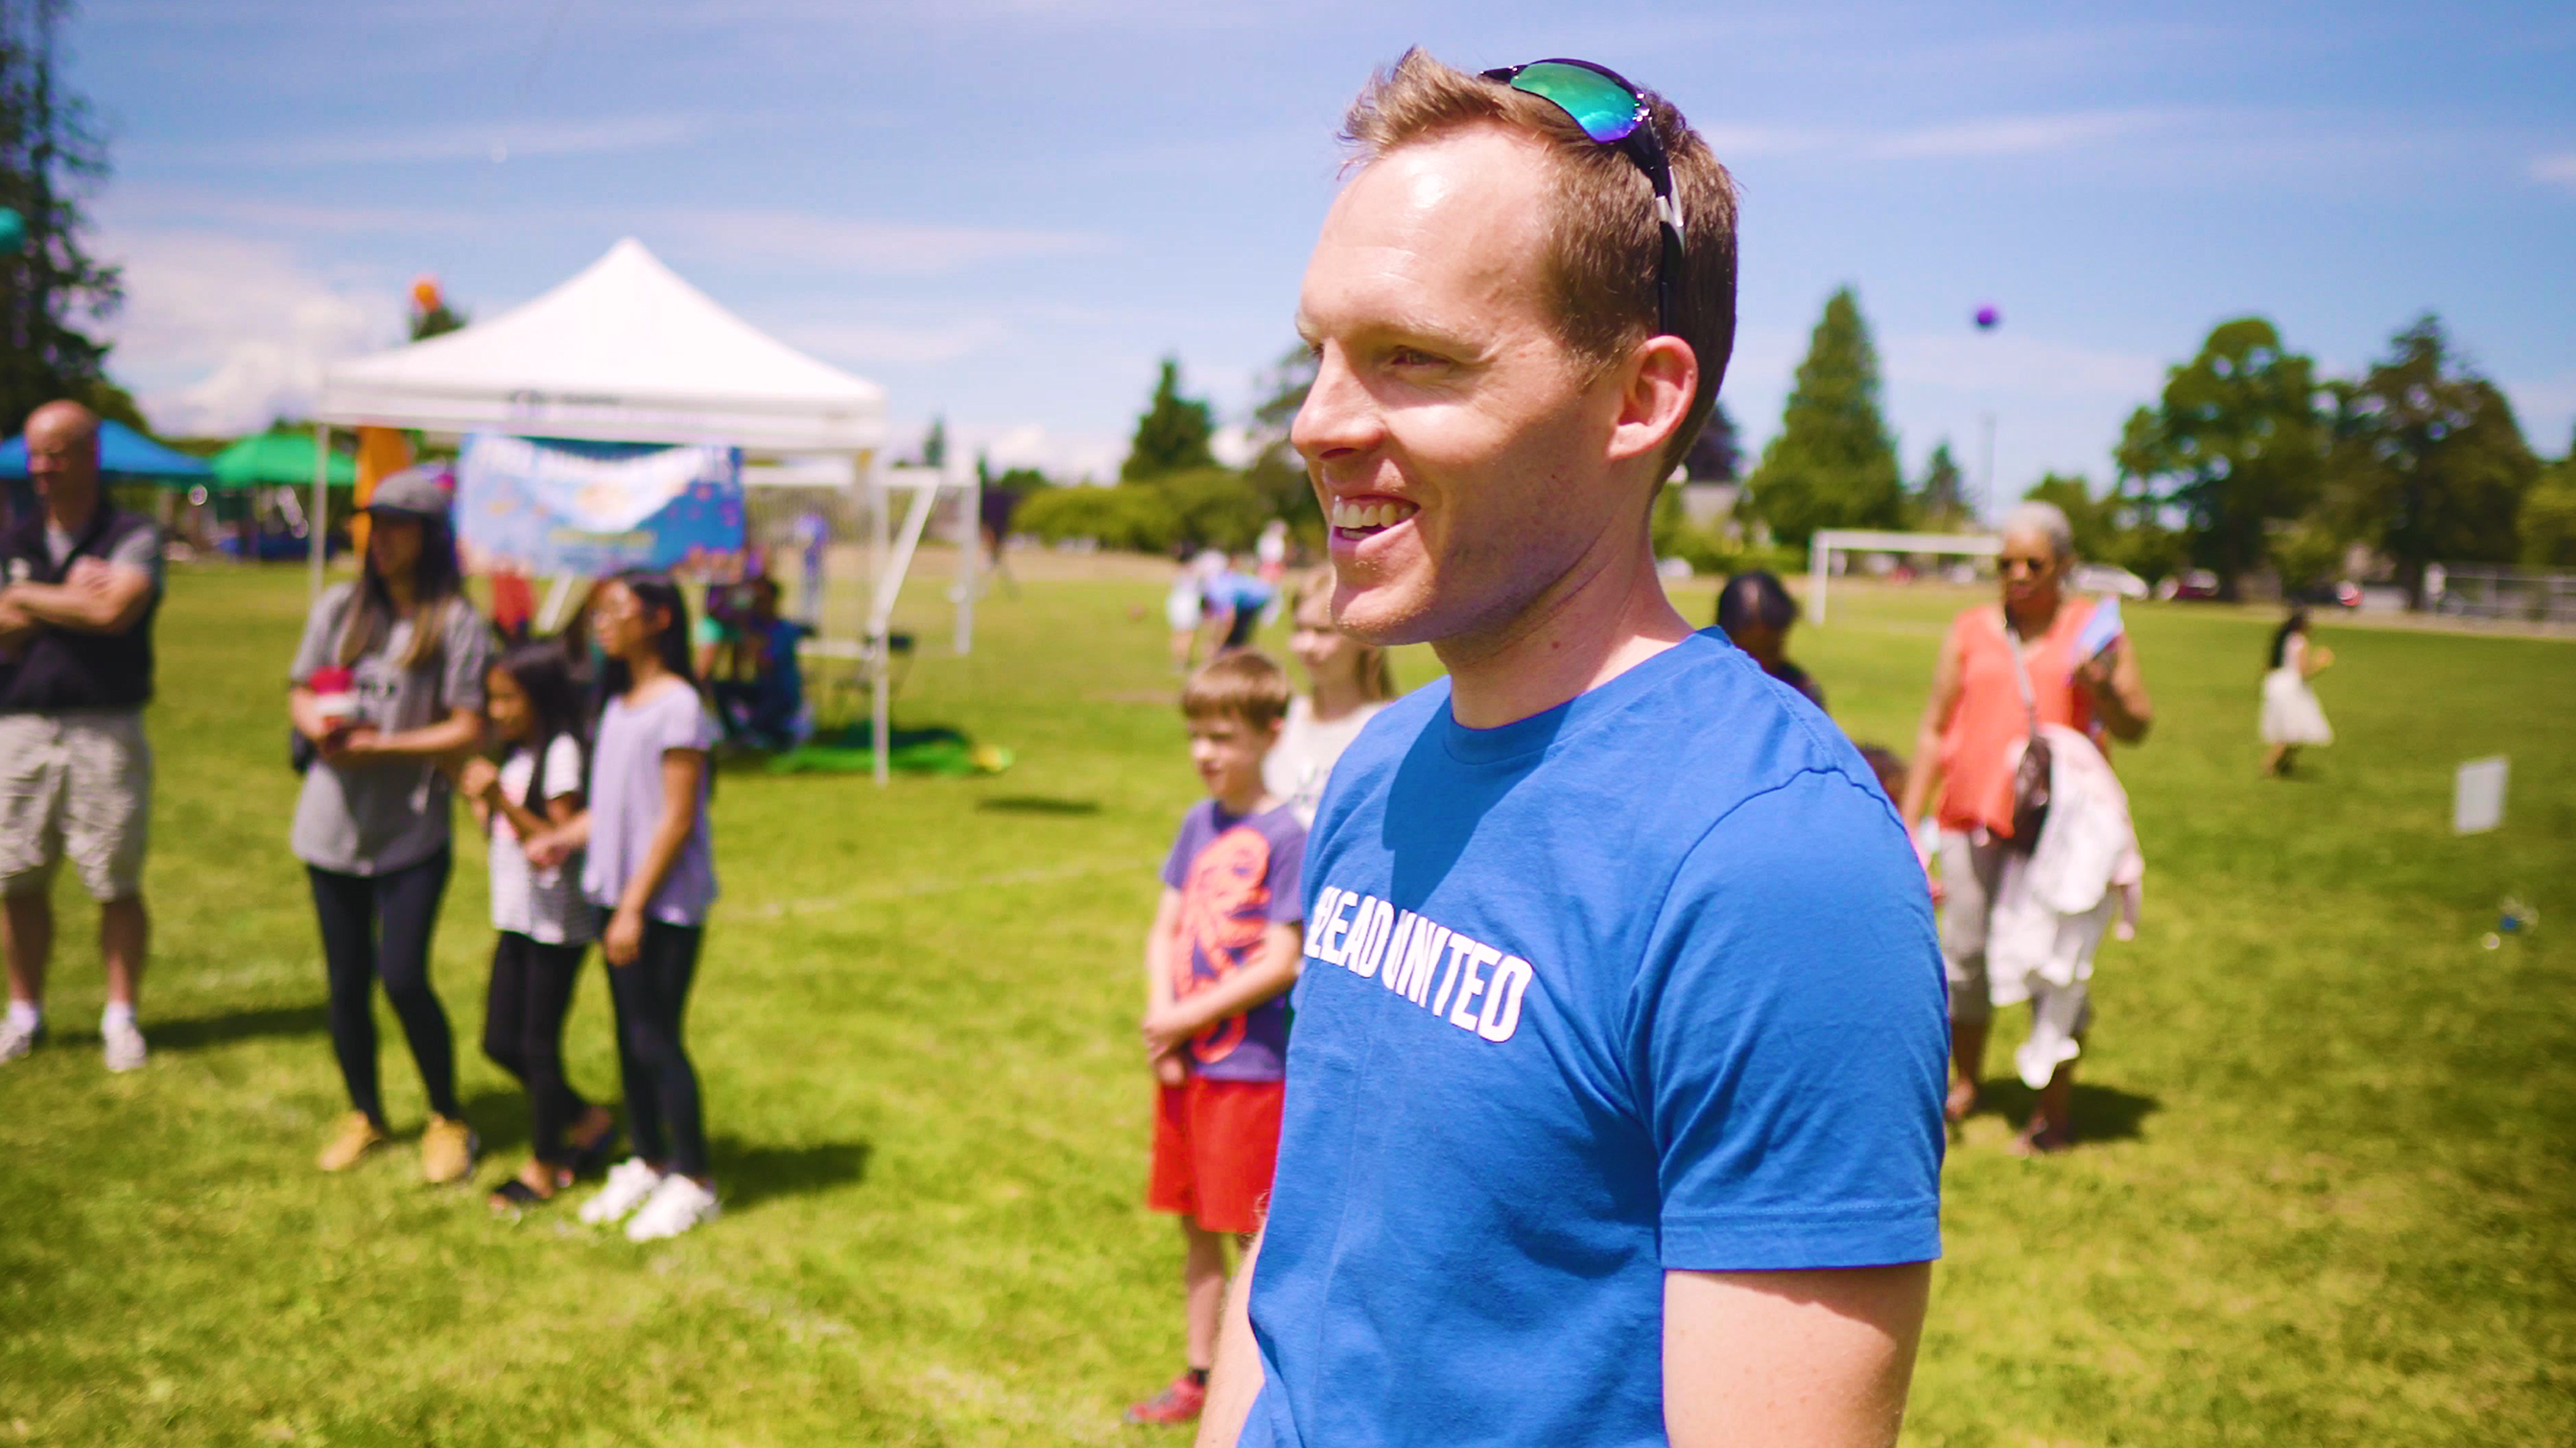 A profile image of the blog's author, a white male in his 30s with blond hair, smiling at something off camera. He wears a shirt that says LeadUnited. behind him are people watching kids playing various outdoor games. It is a sunny day.